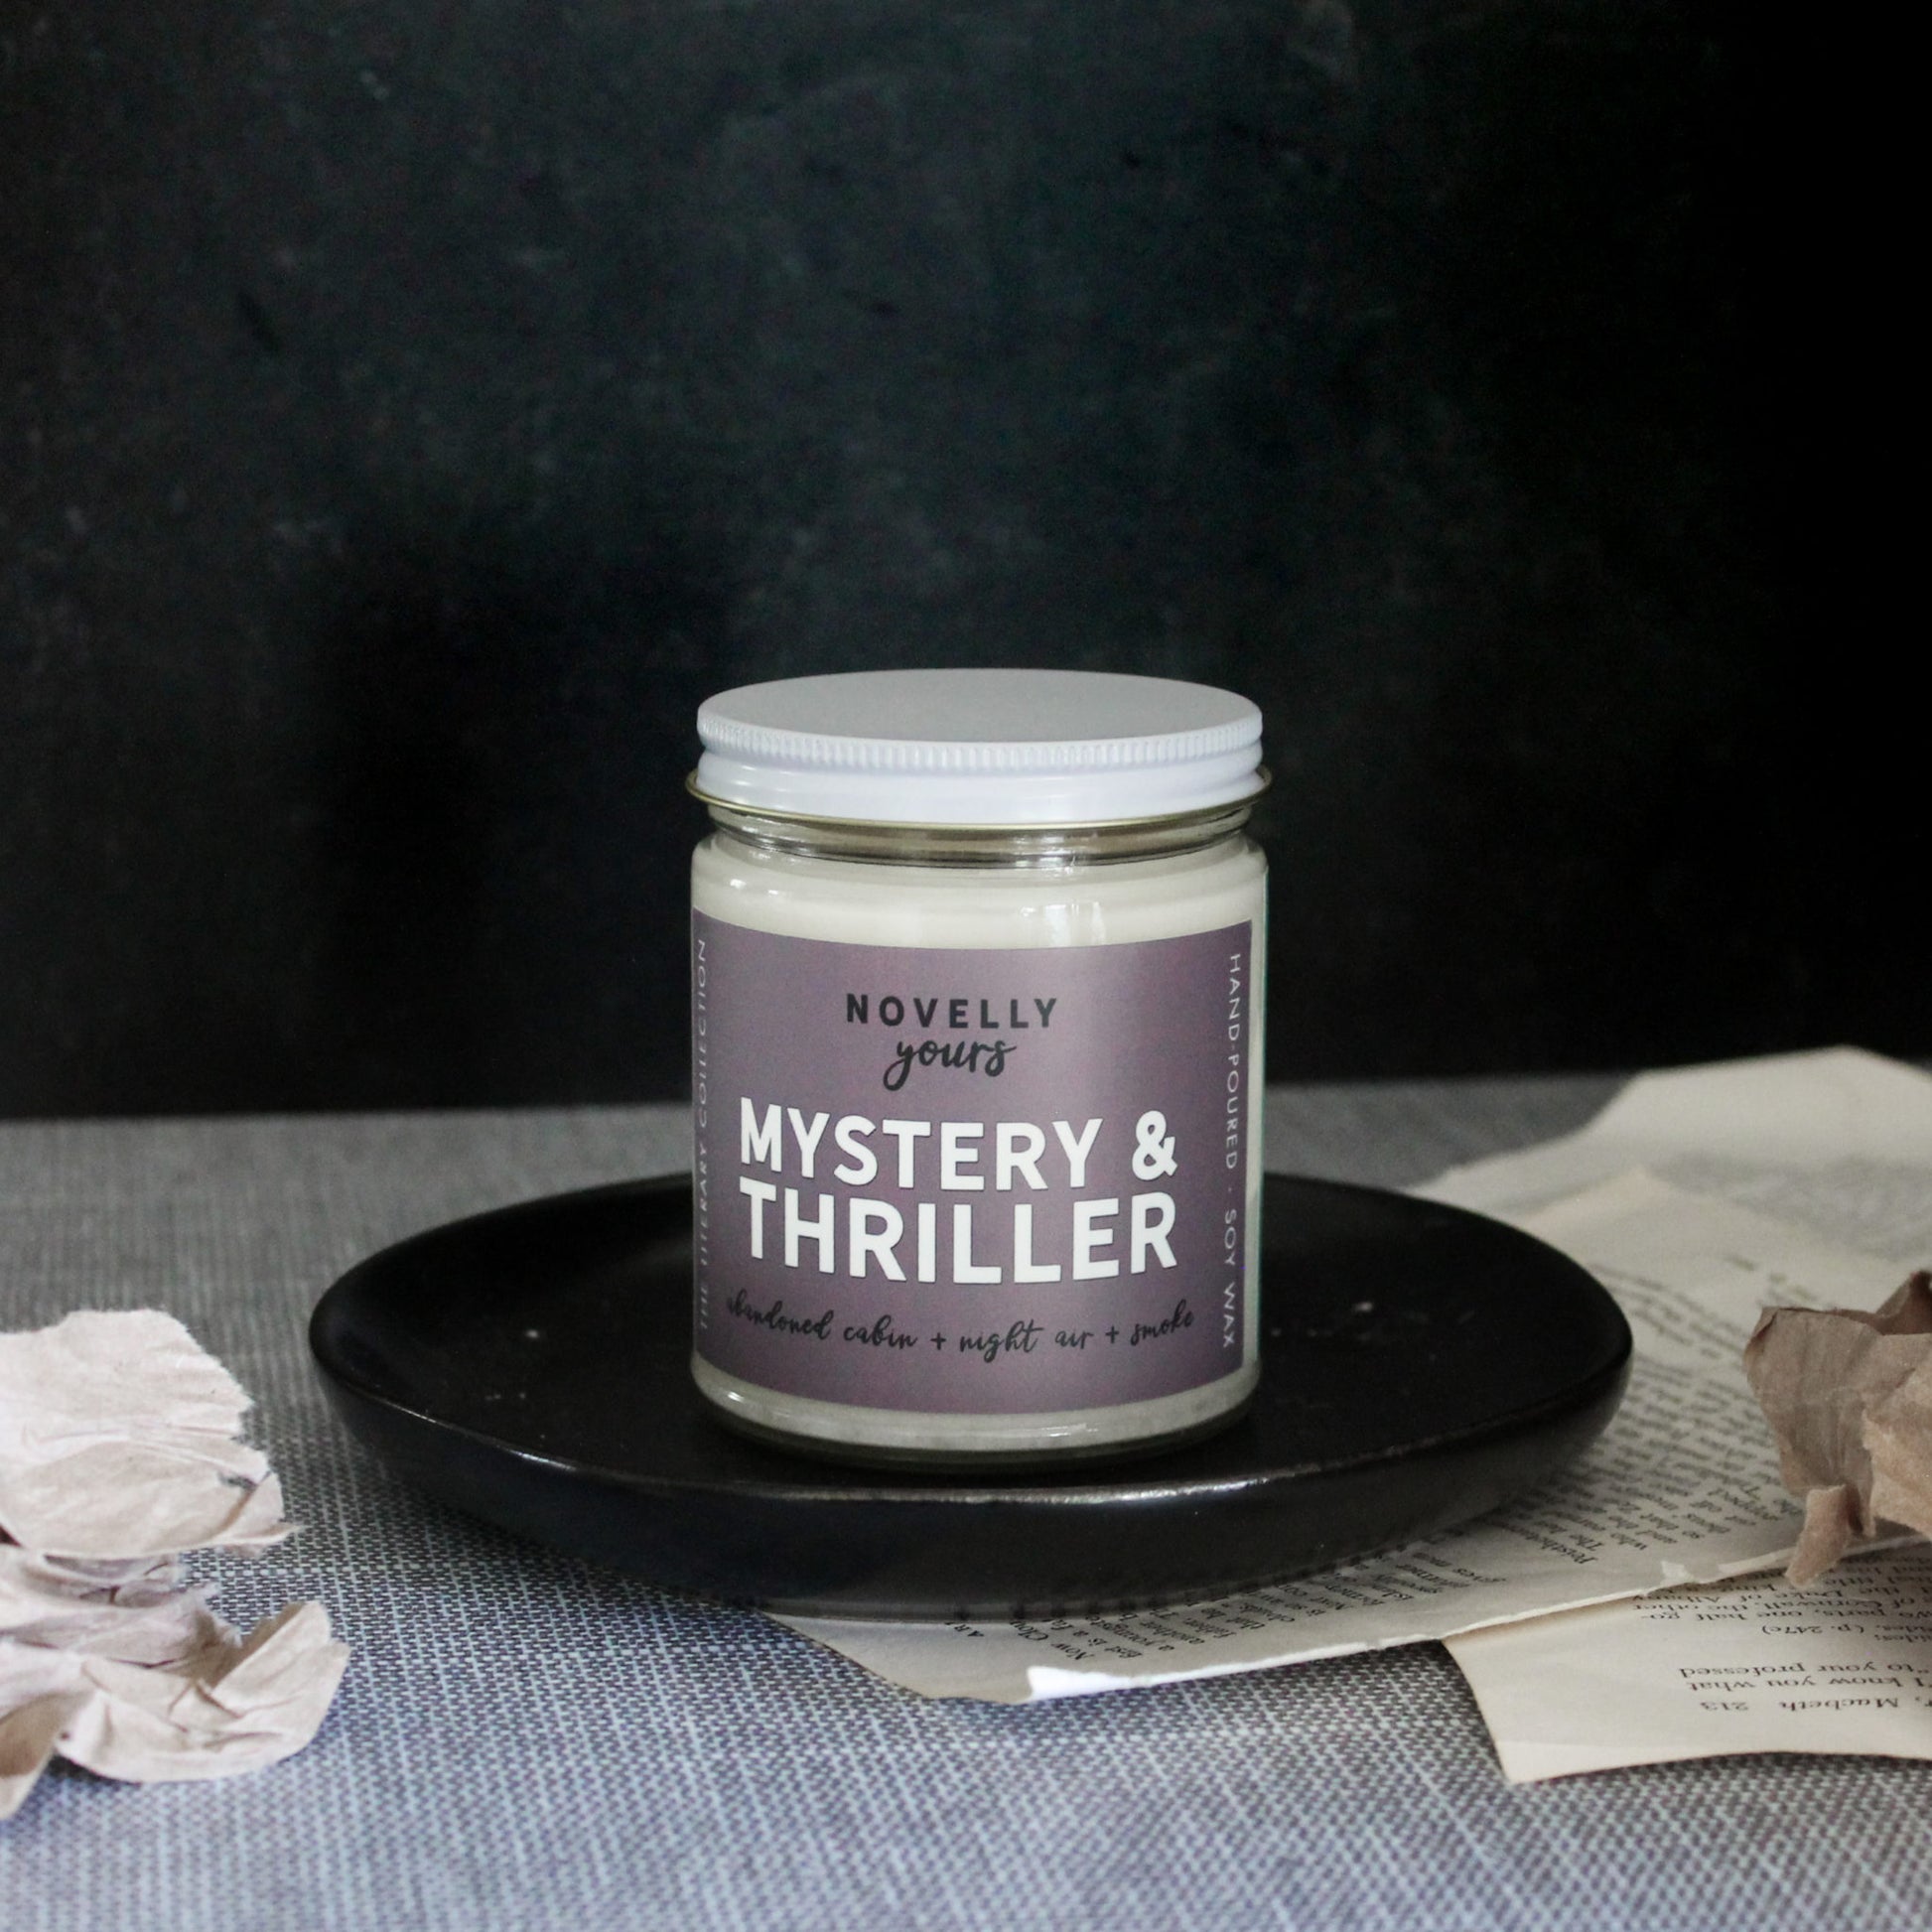 mystery & thriller scented soy wax candle with purple grey label and white lid sits on black round tray with paper accents